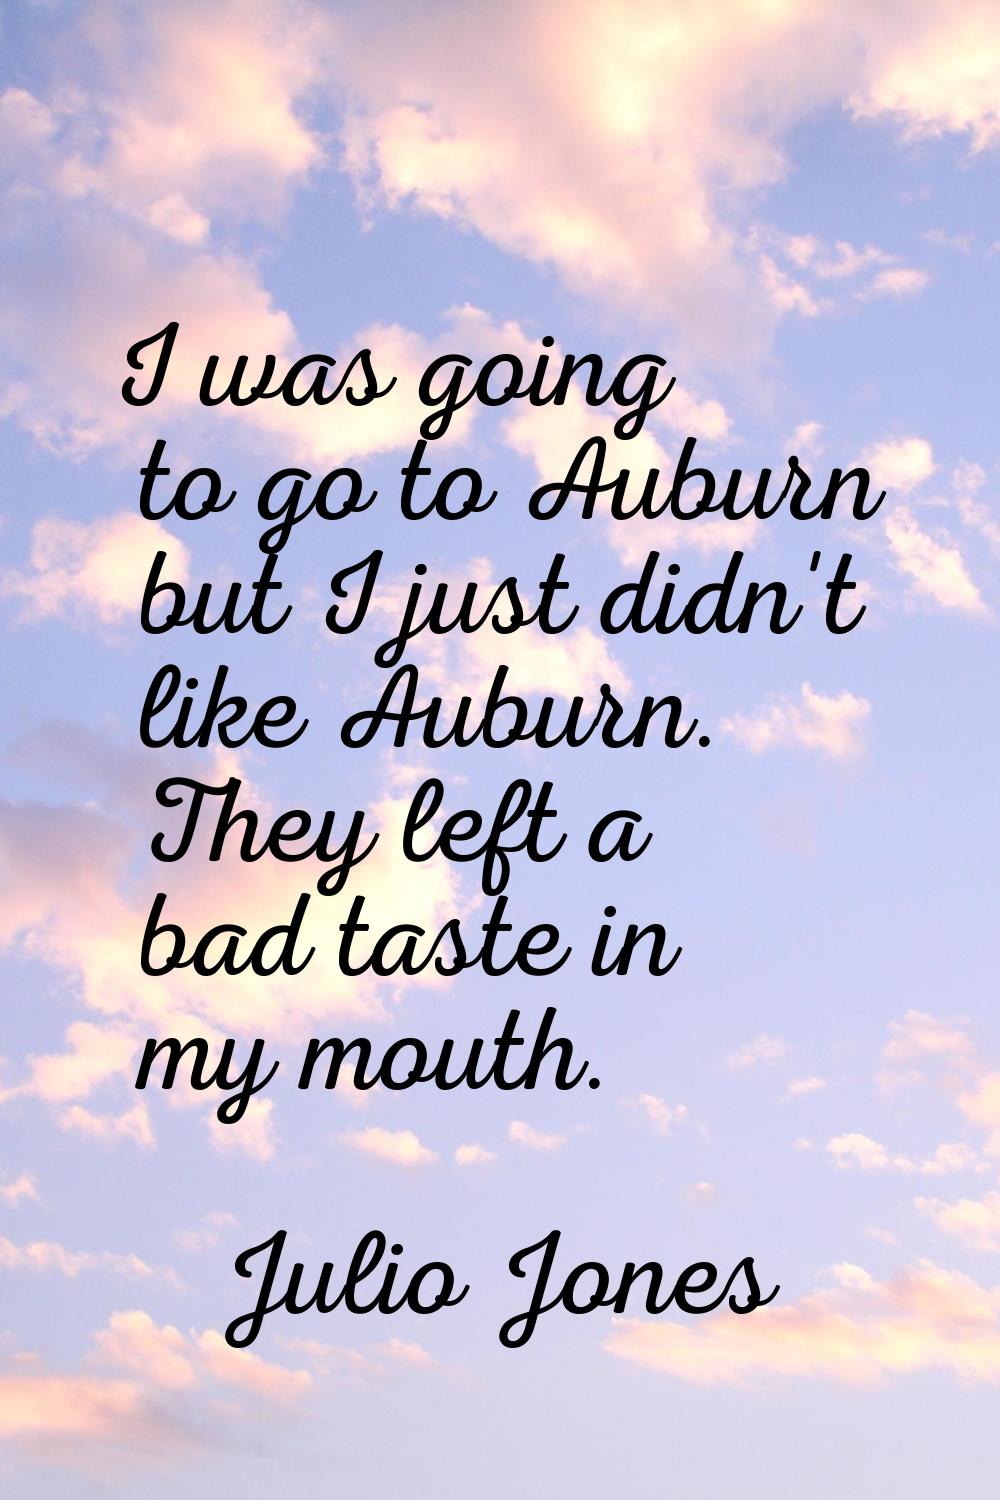 I was going to go to Auburn but I just didn't like Auburn. They left a bad taste in my mouth.